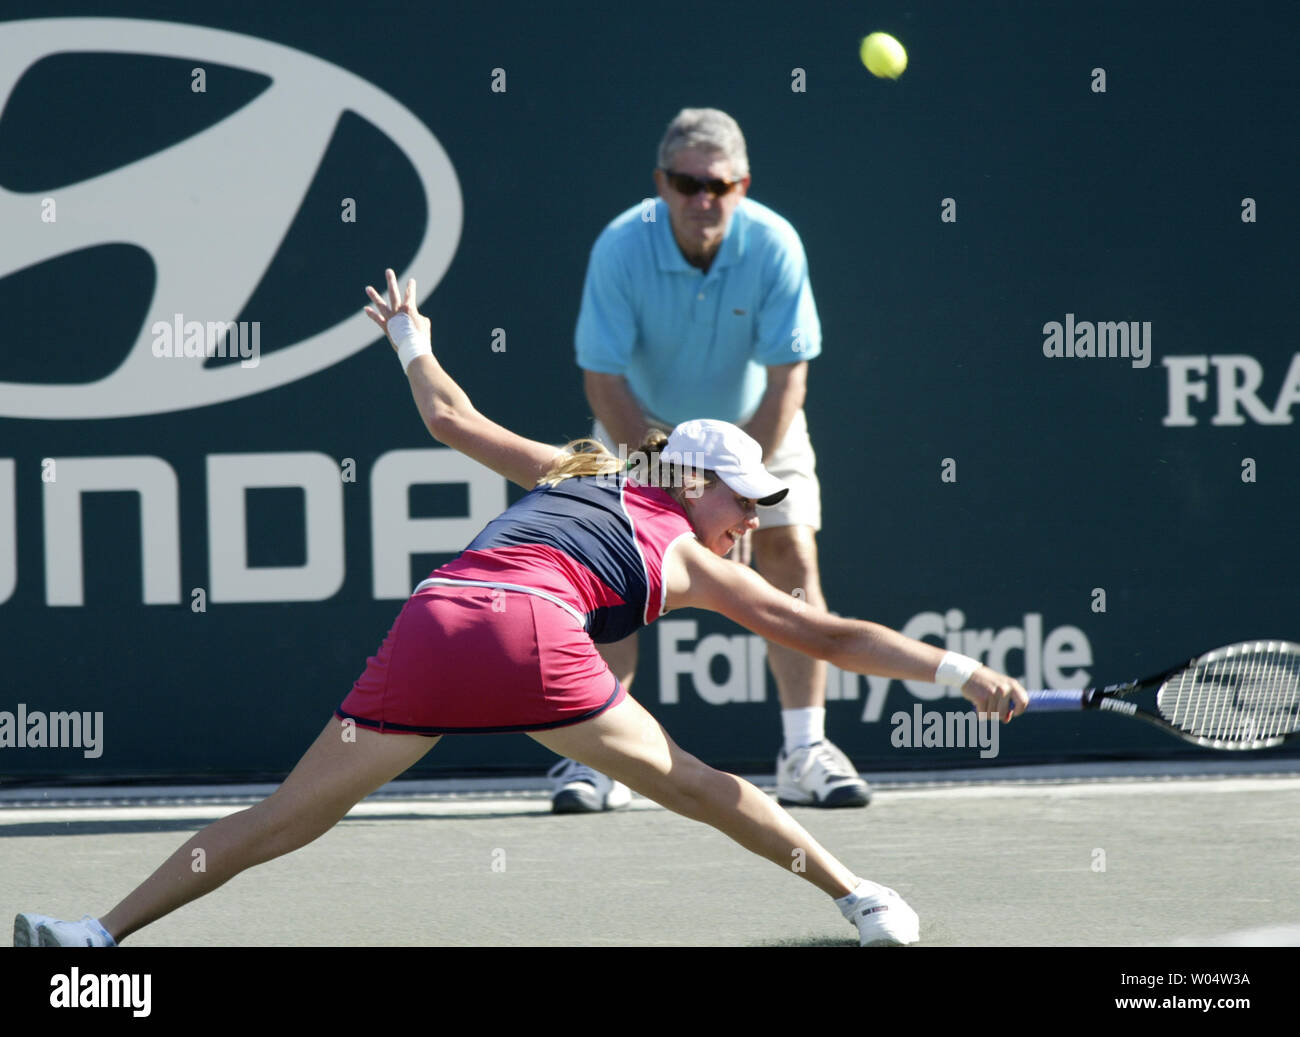 Vera Zvonareva of Russia stretches to hit a backhand shot on the baseline against Michaella Krajicek of the Netherlands in the quarterfinals of the Family Circle Cup tennis tournament in Charleston, South Carolina on April 13, 2007. Zvonareva won the match 6-1, 7-5. (UPI Photo/Nell Redmond) Stock Photo